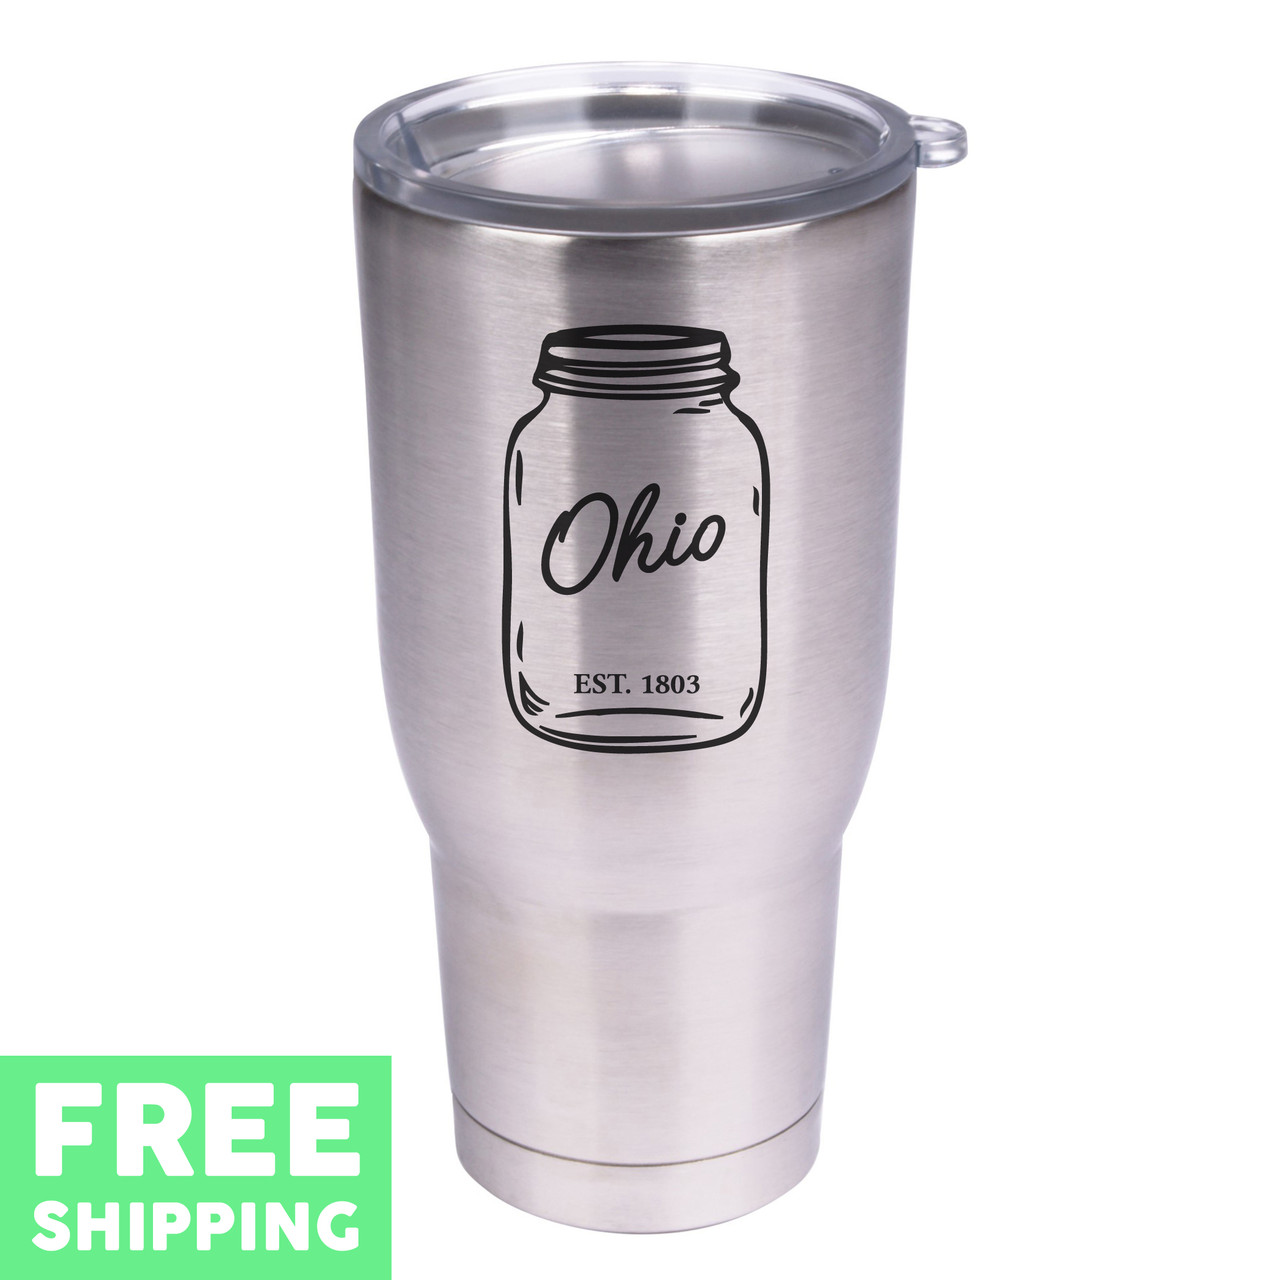 https://cdn11.bigcommerce.com/s-pza6oiin/images/stencil/1280x1280/products/9976/17561/ohiomasonjar_32oz_stainless_3625_freeshipping__13081.1602542039.jpg?c=2?imbypass=on